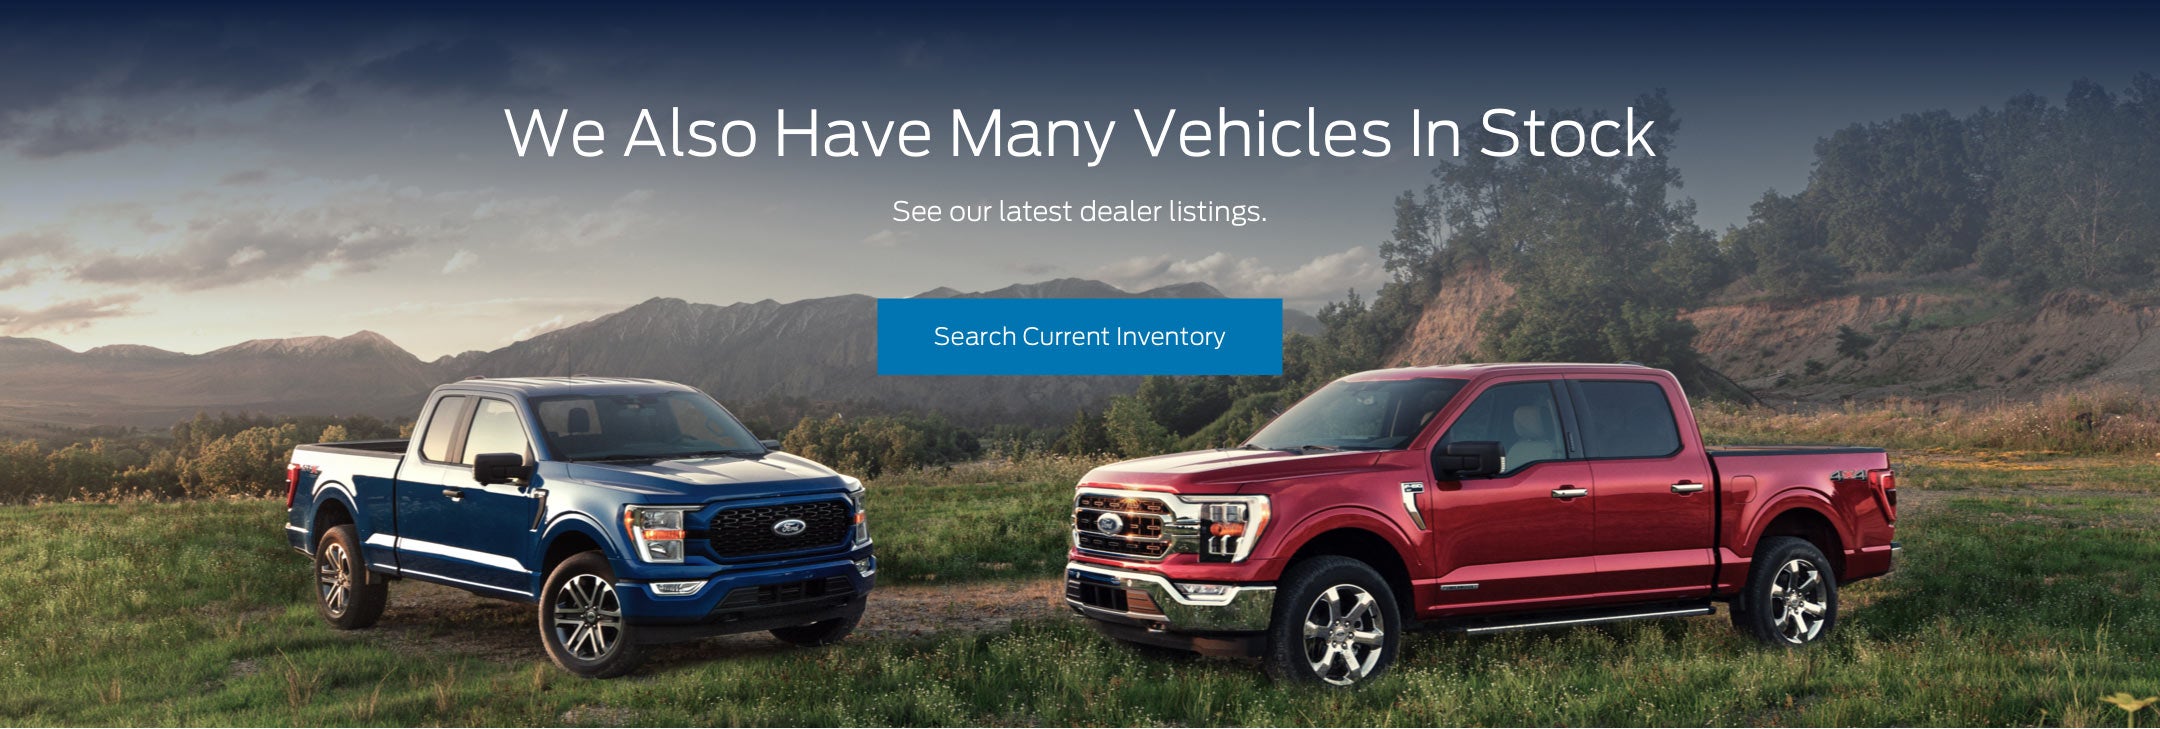 Ford vehicles in stock | Parkway Ford Lincoln Of Lexington in Lexington NC